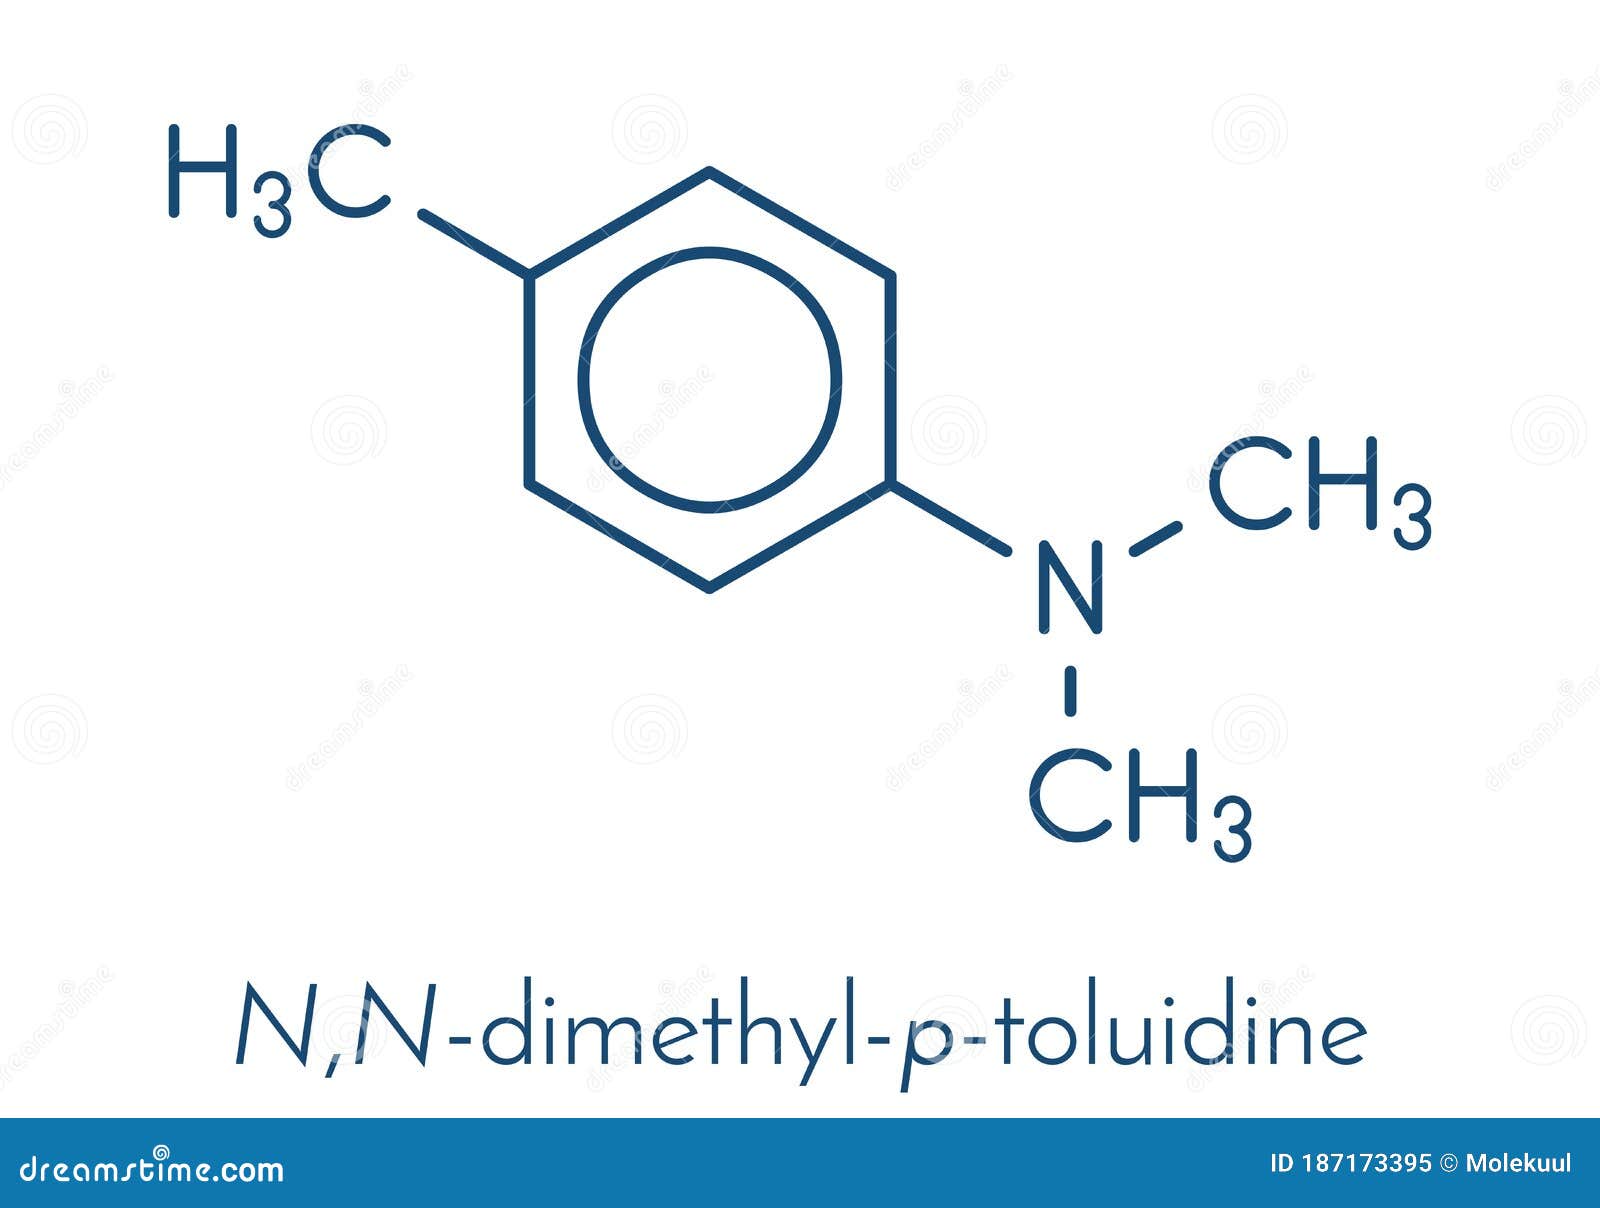 n,n-dimethyl-p-toluidine dmpt molecule. commonly used as catalyst in the production of polymers and in dental materials and bone